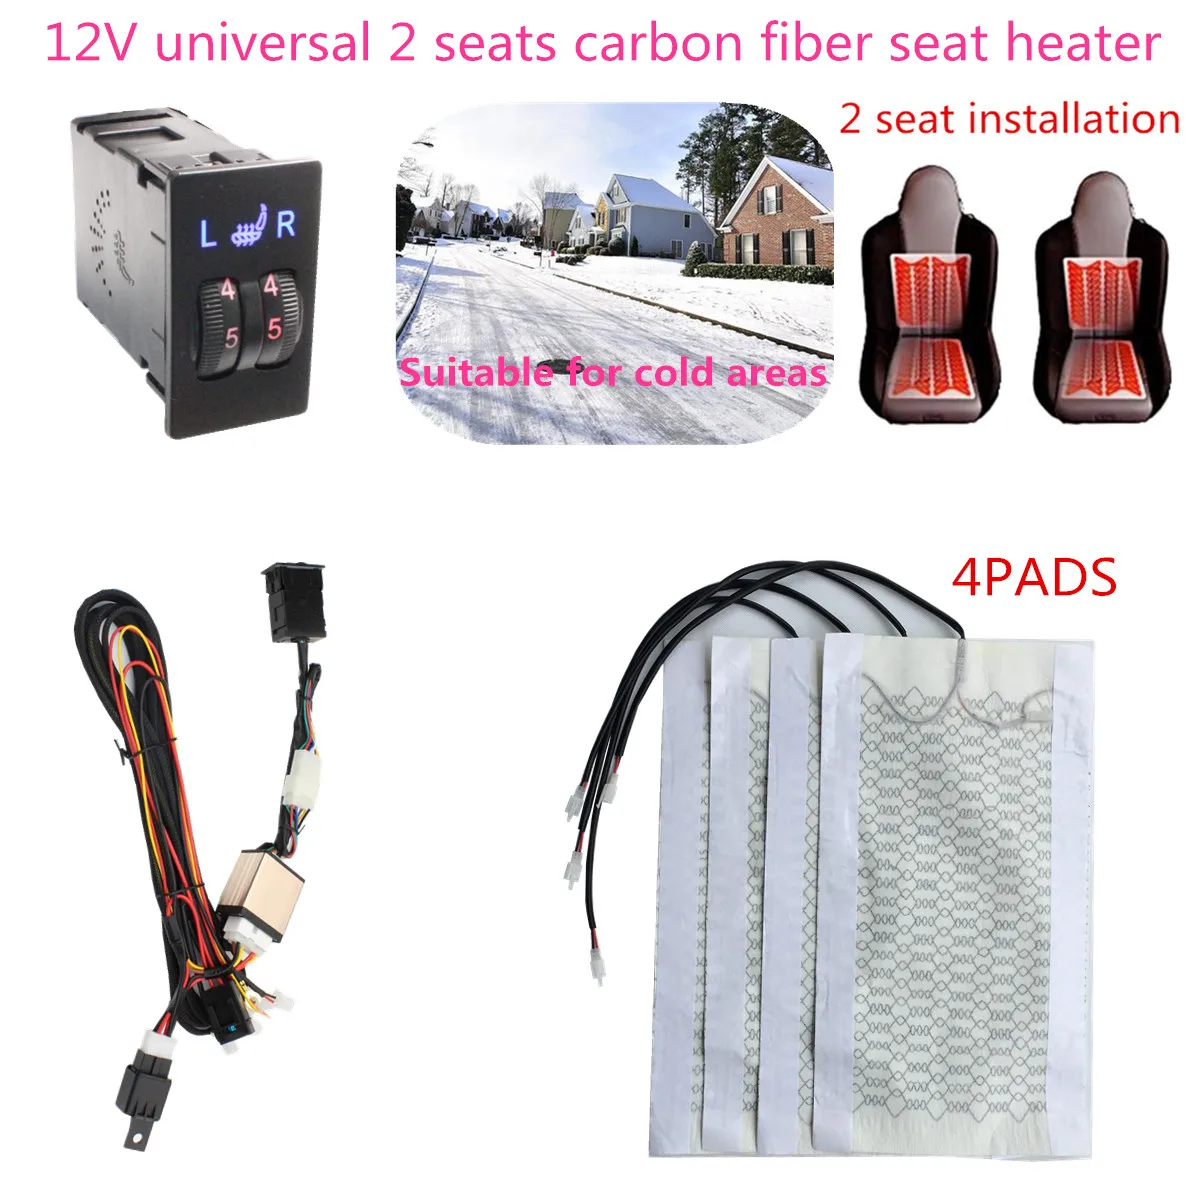 2 Seats 4 Pads Universal Carbon Fiber Heated Seat Heater car 12V Pads 2 Dial 5 Switch Benches interior seat warm accessories